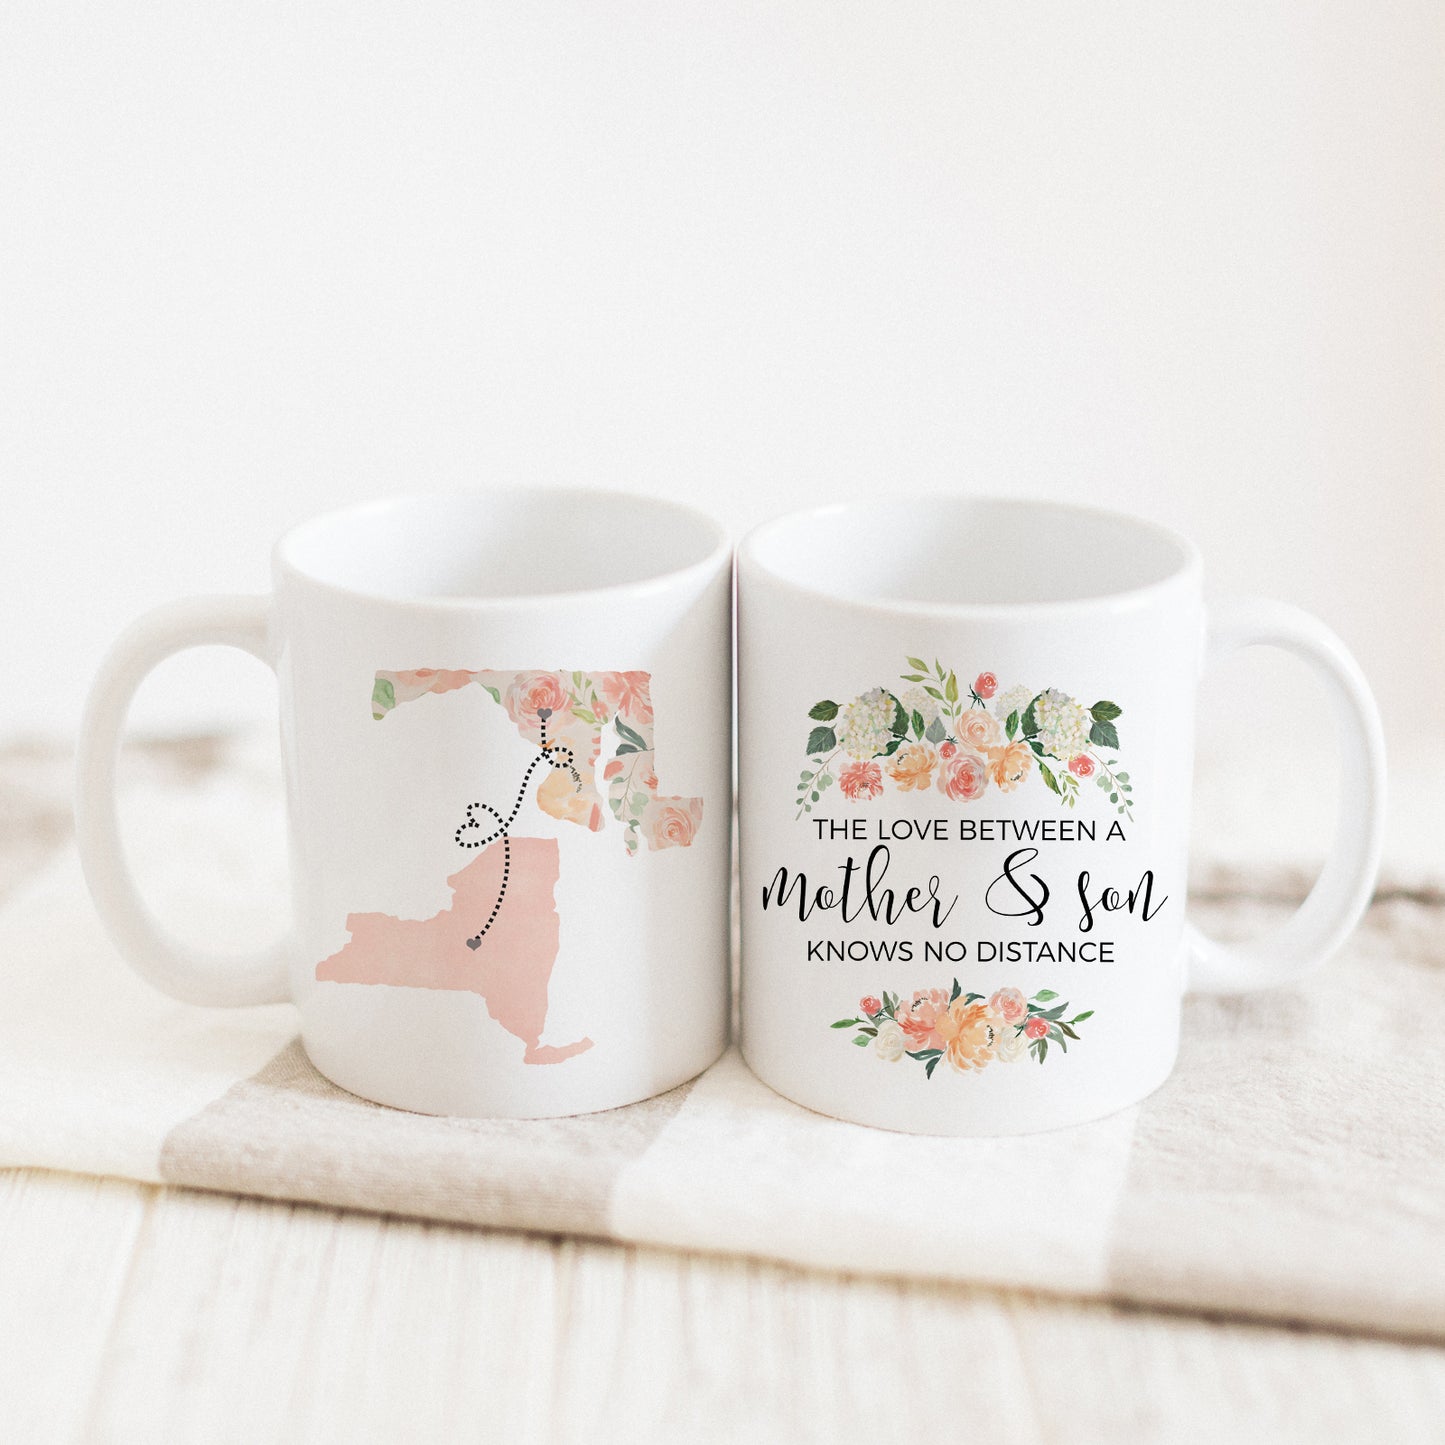 The Love Between A Mother & Son Mug